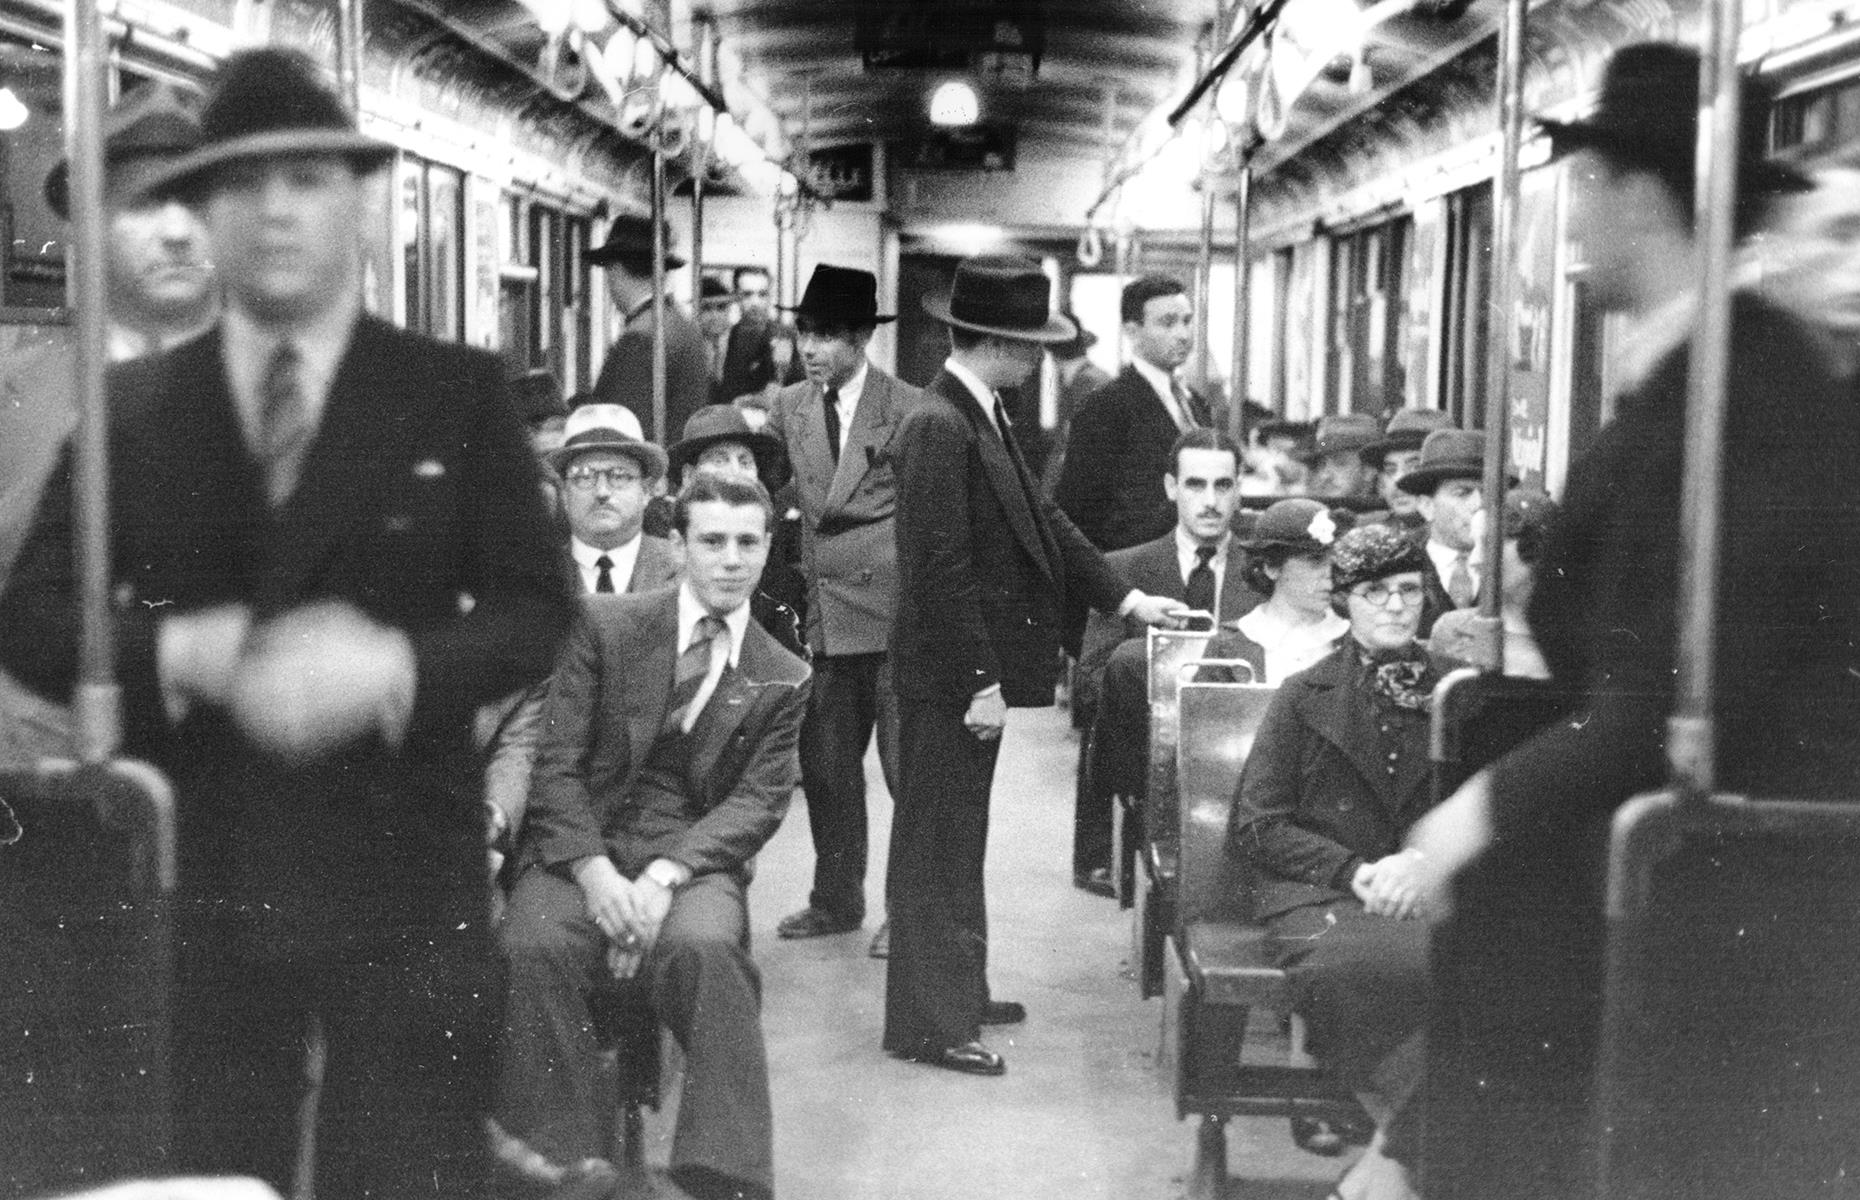 Buenos Aires' metro system is the oldest in South America. Ideas for an underground train network in the city were first floated in the 19th century and it eventually began operation in 1913, joining up landmark sites like Plaza de Mayo and Plaza Miserere. Passengers are pictured here in a metro car circa 1938.